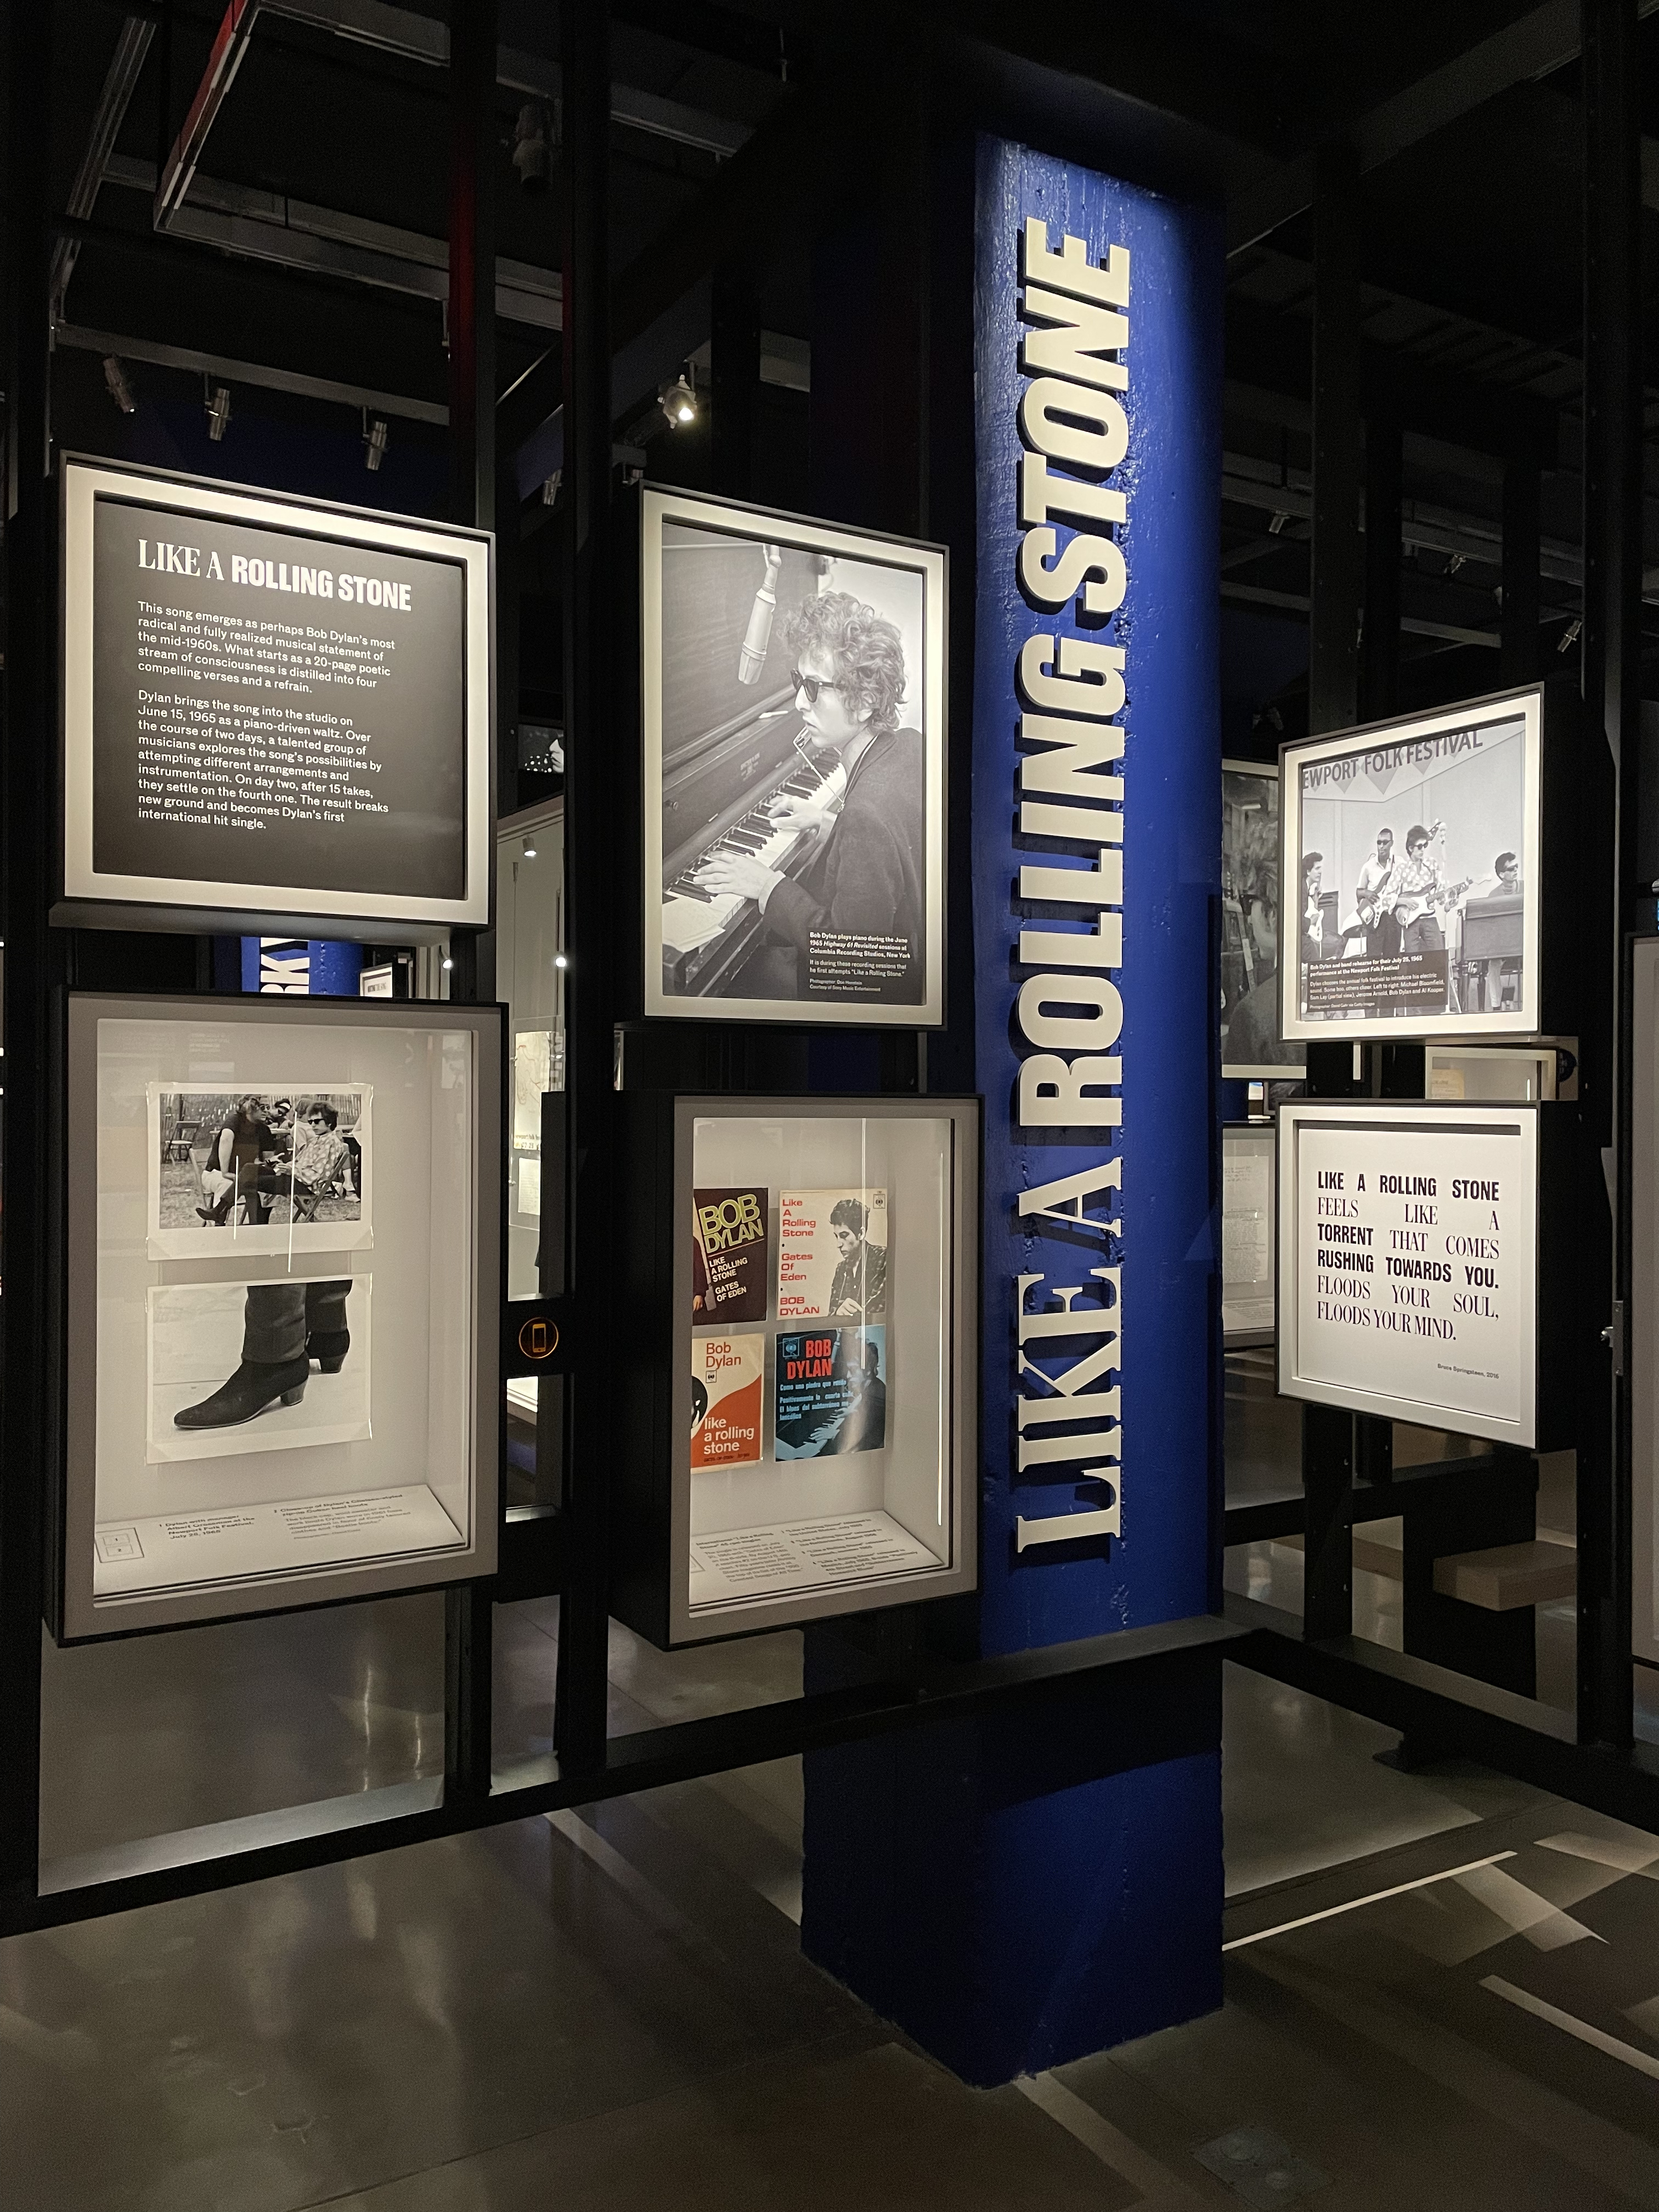 A display of photos and text about the song "Like a Rolling Stone"